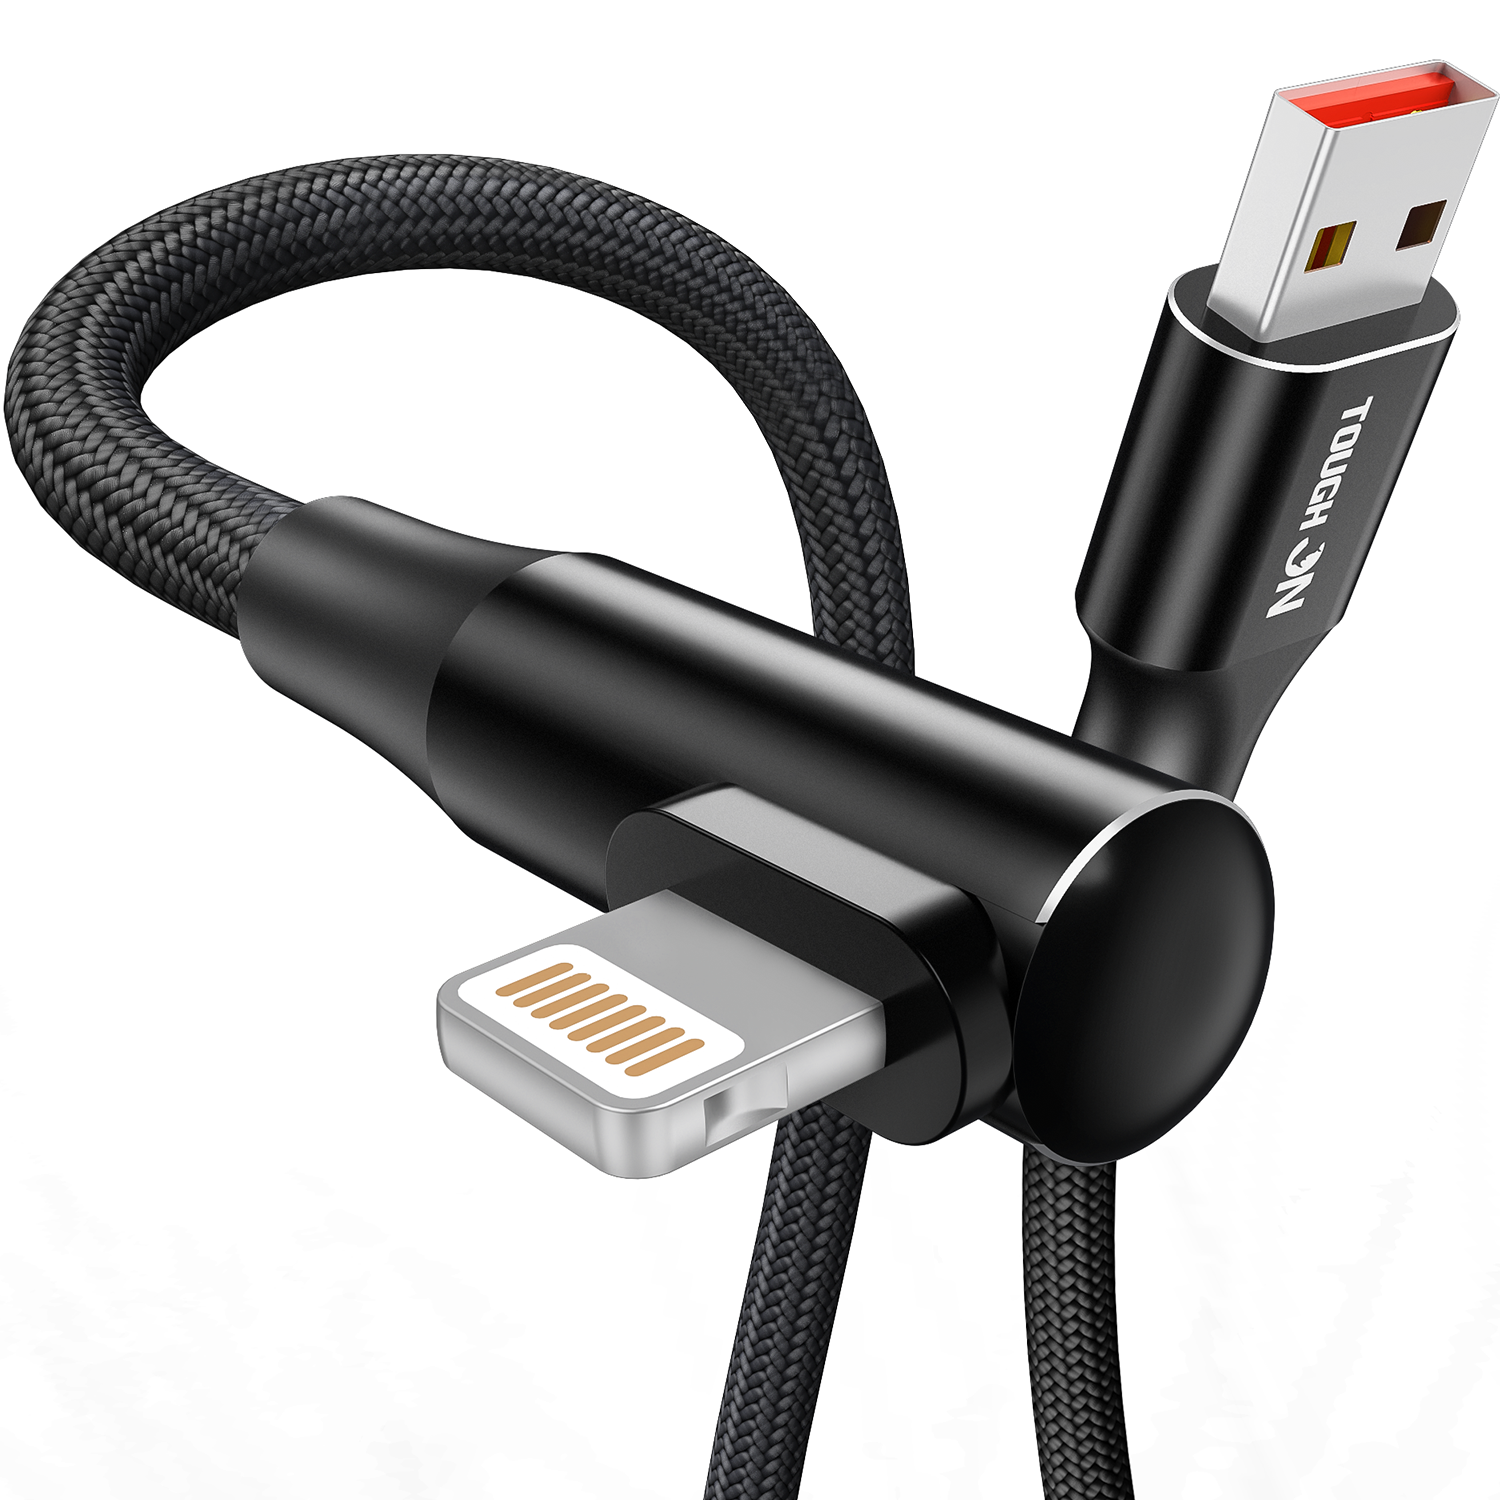 Tough On USB A to Lightning Cable Fast Charging Cable 2M